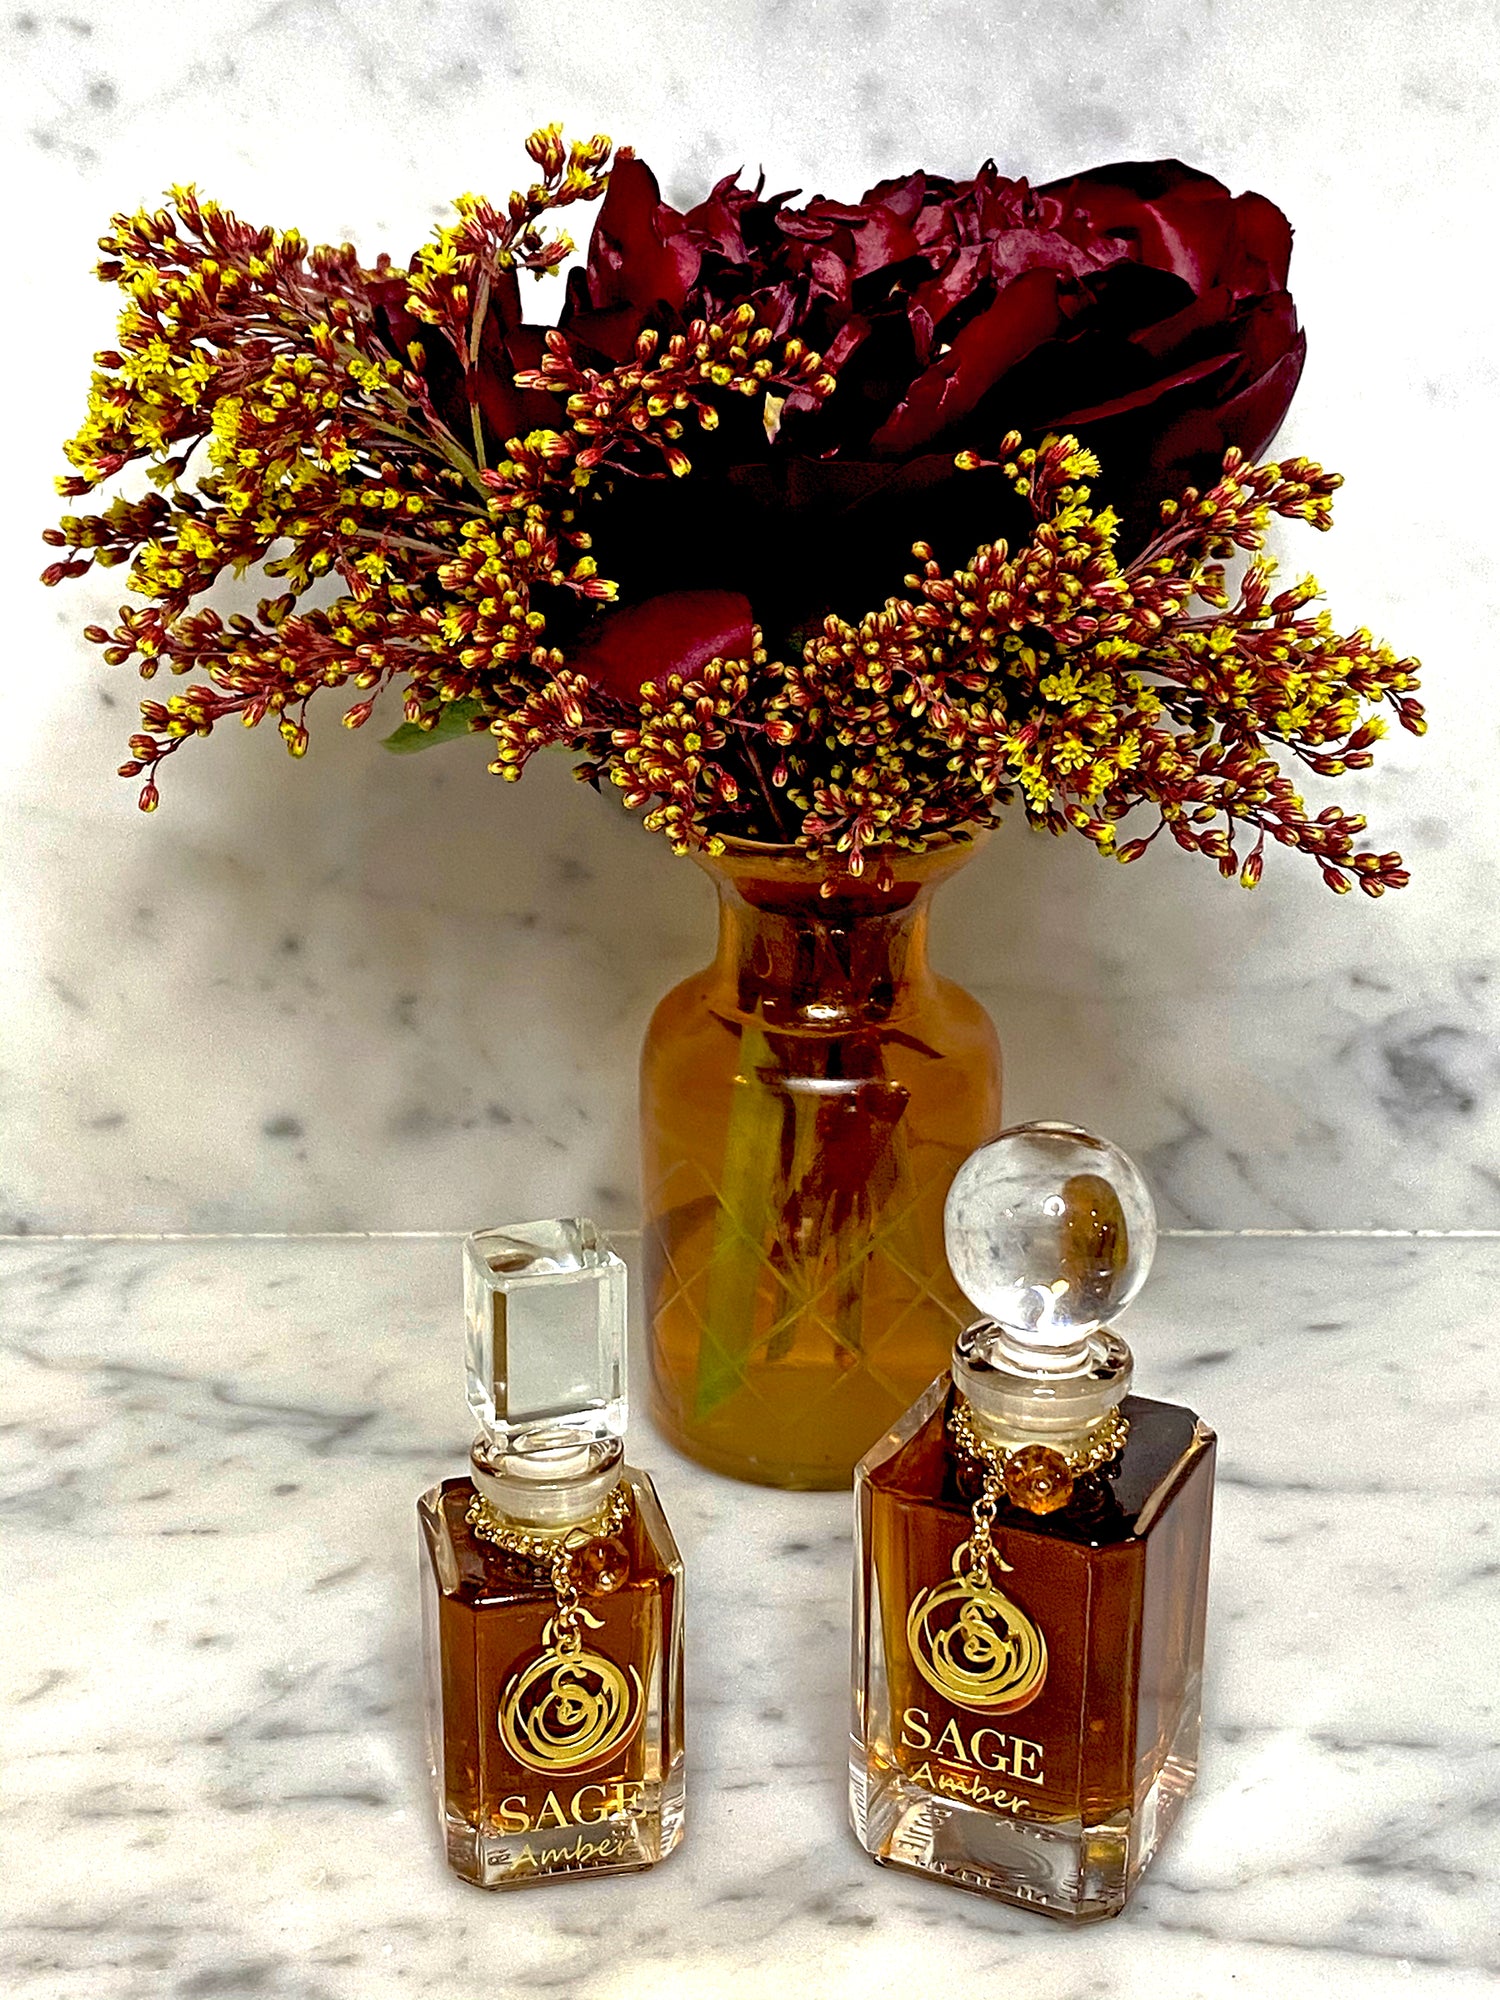 Amber Vanity Bottle by Sage, Pure Perfume Oil - The Sage Lifestyle